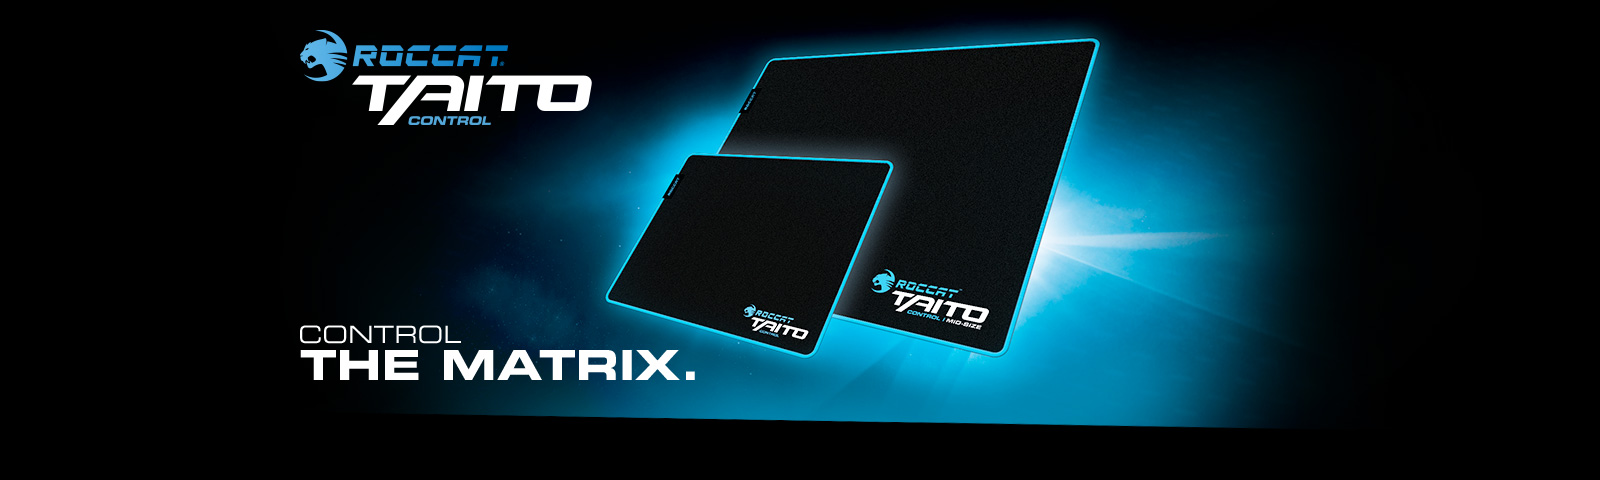 https://media.roccat.org/img/products/Taito-Control/teaser/main/1424878312/background/all/main-teaser-taito-control-v3.jpg